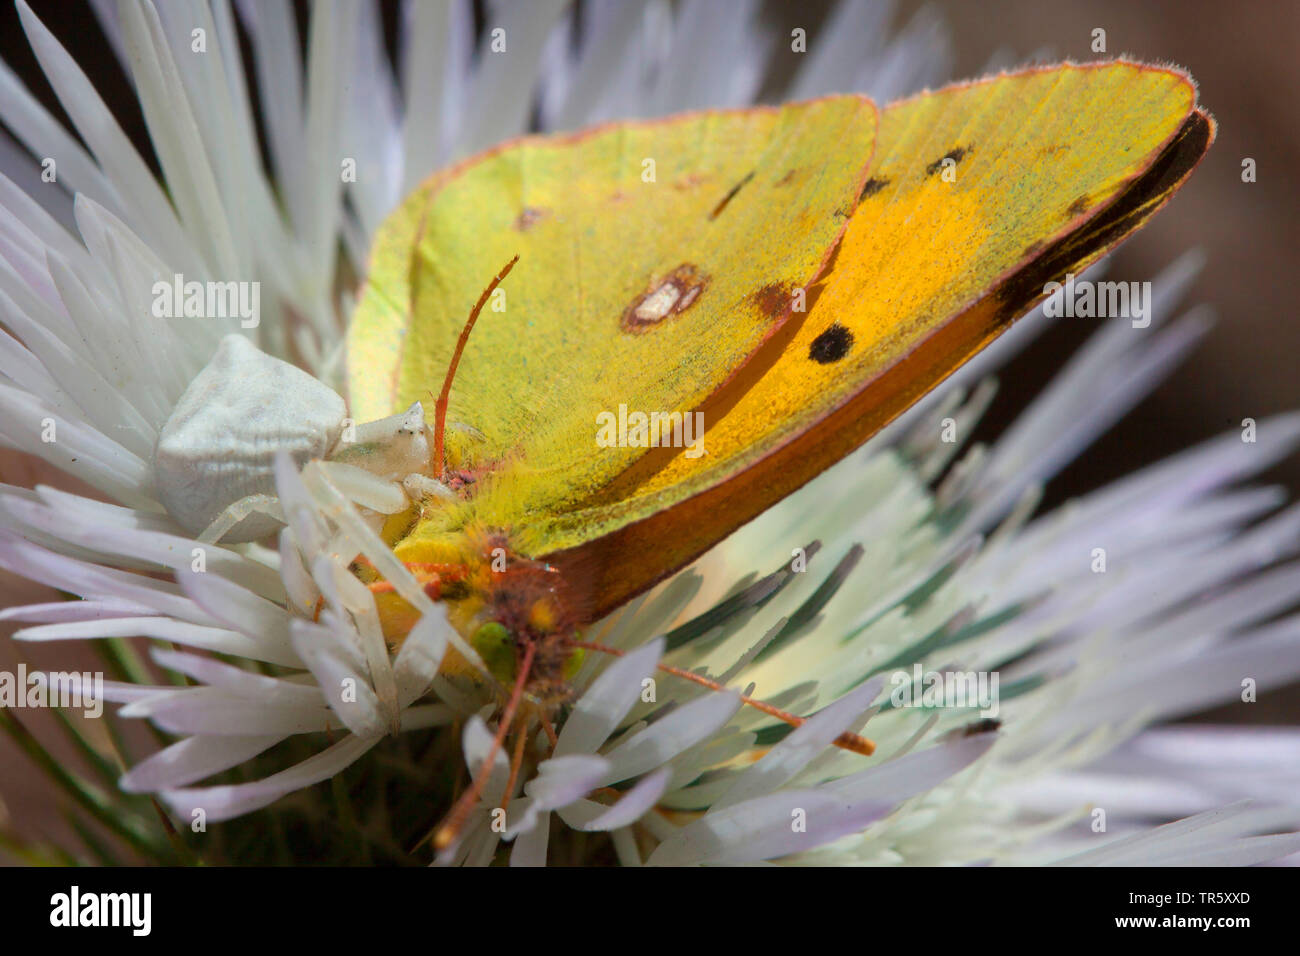 Crab Spider (Thomisus onustus), has caught a clouded yellow, Italy Stock Photo